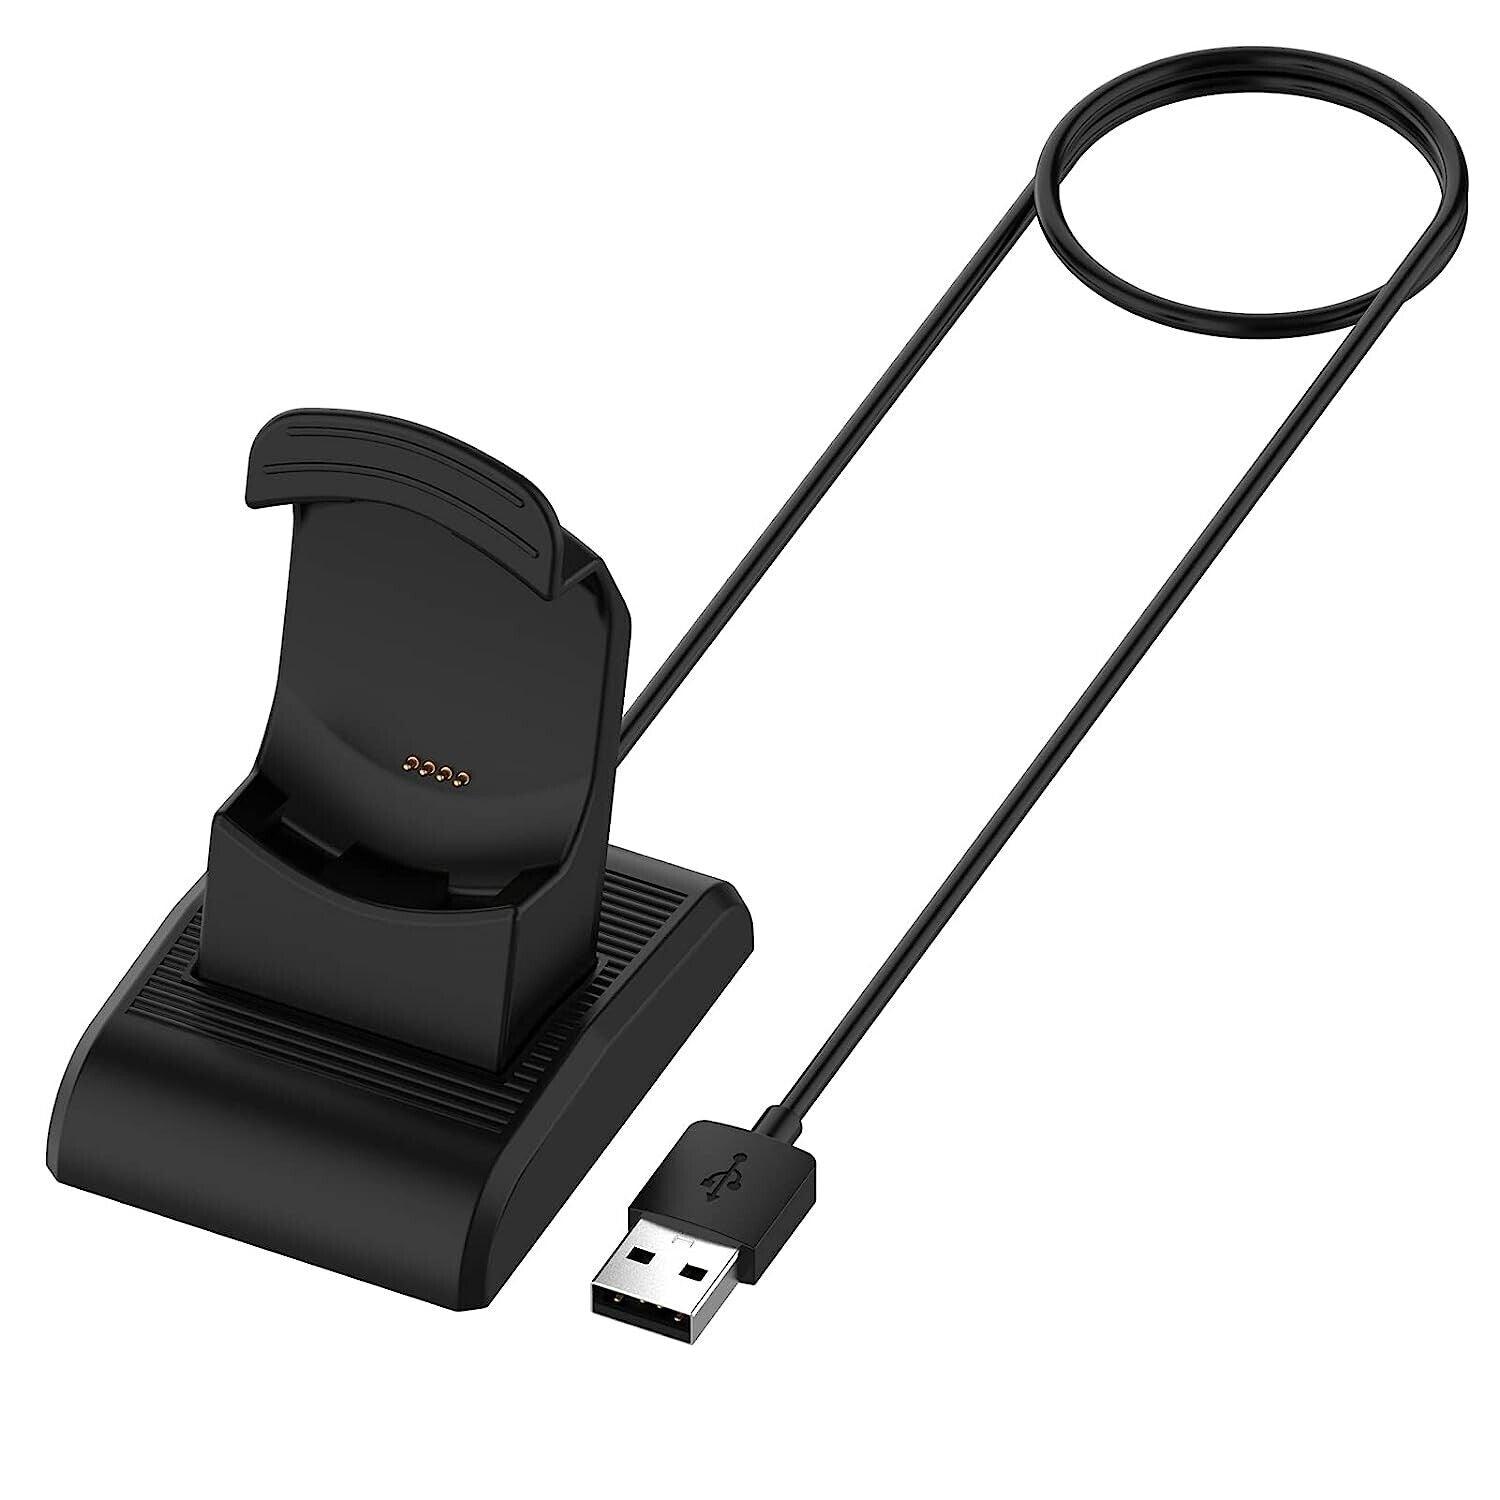 Replacement USB Charing Dock Cable for TecTecTec ULTG - Massive Discounts